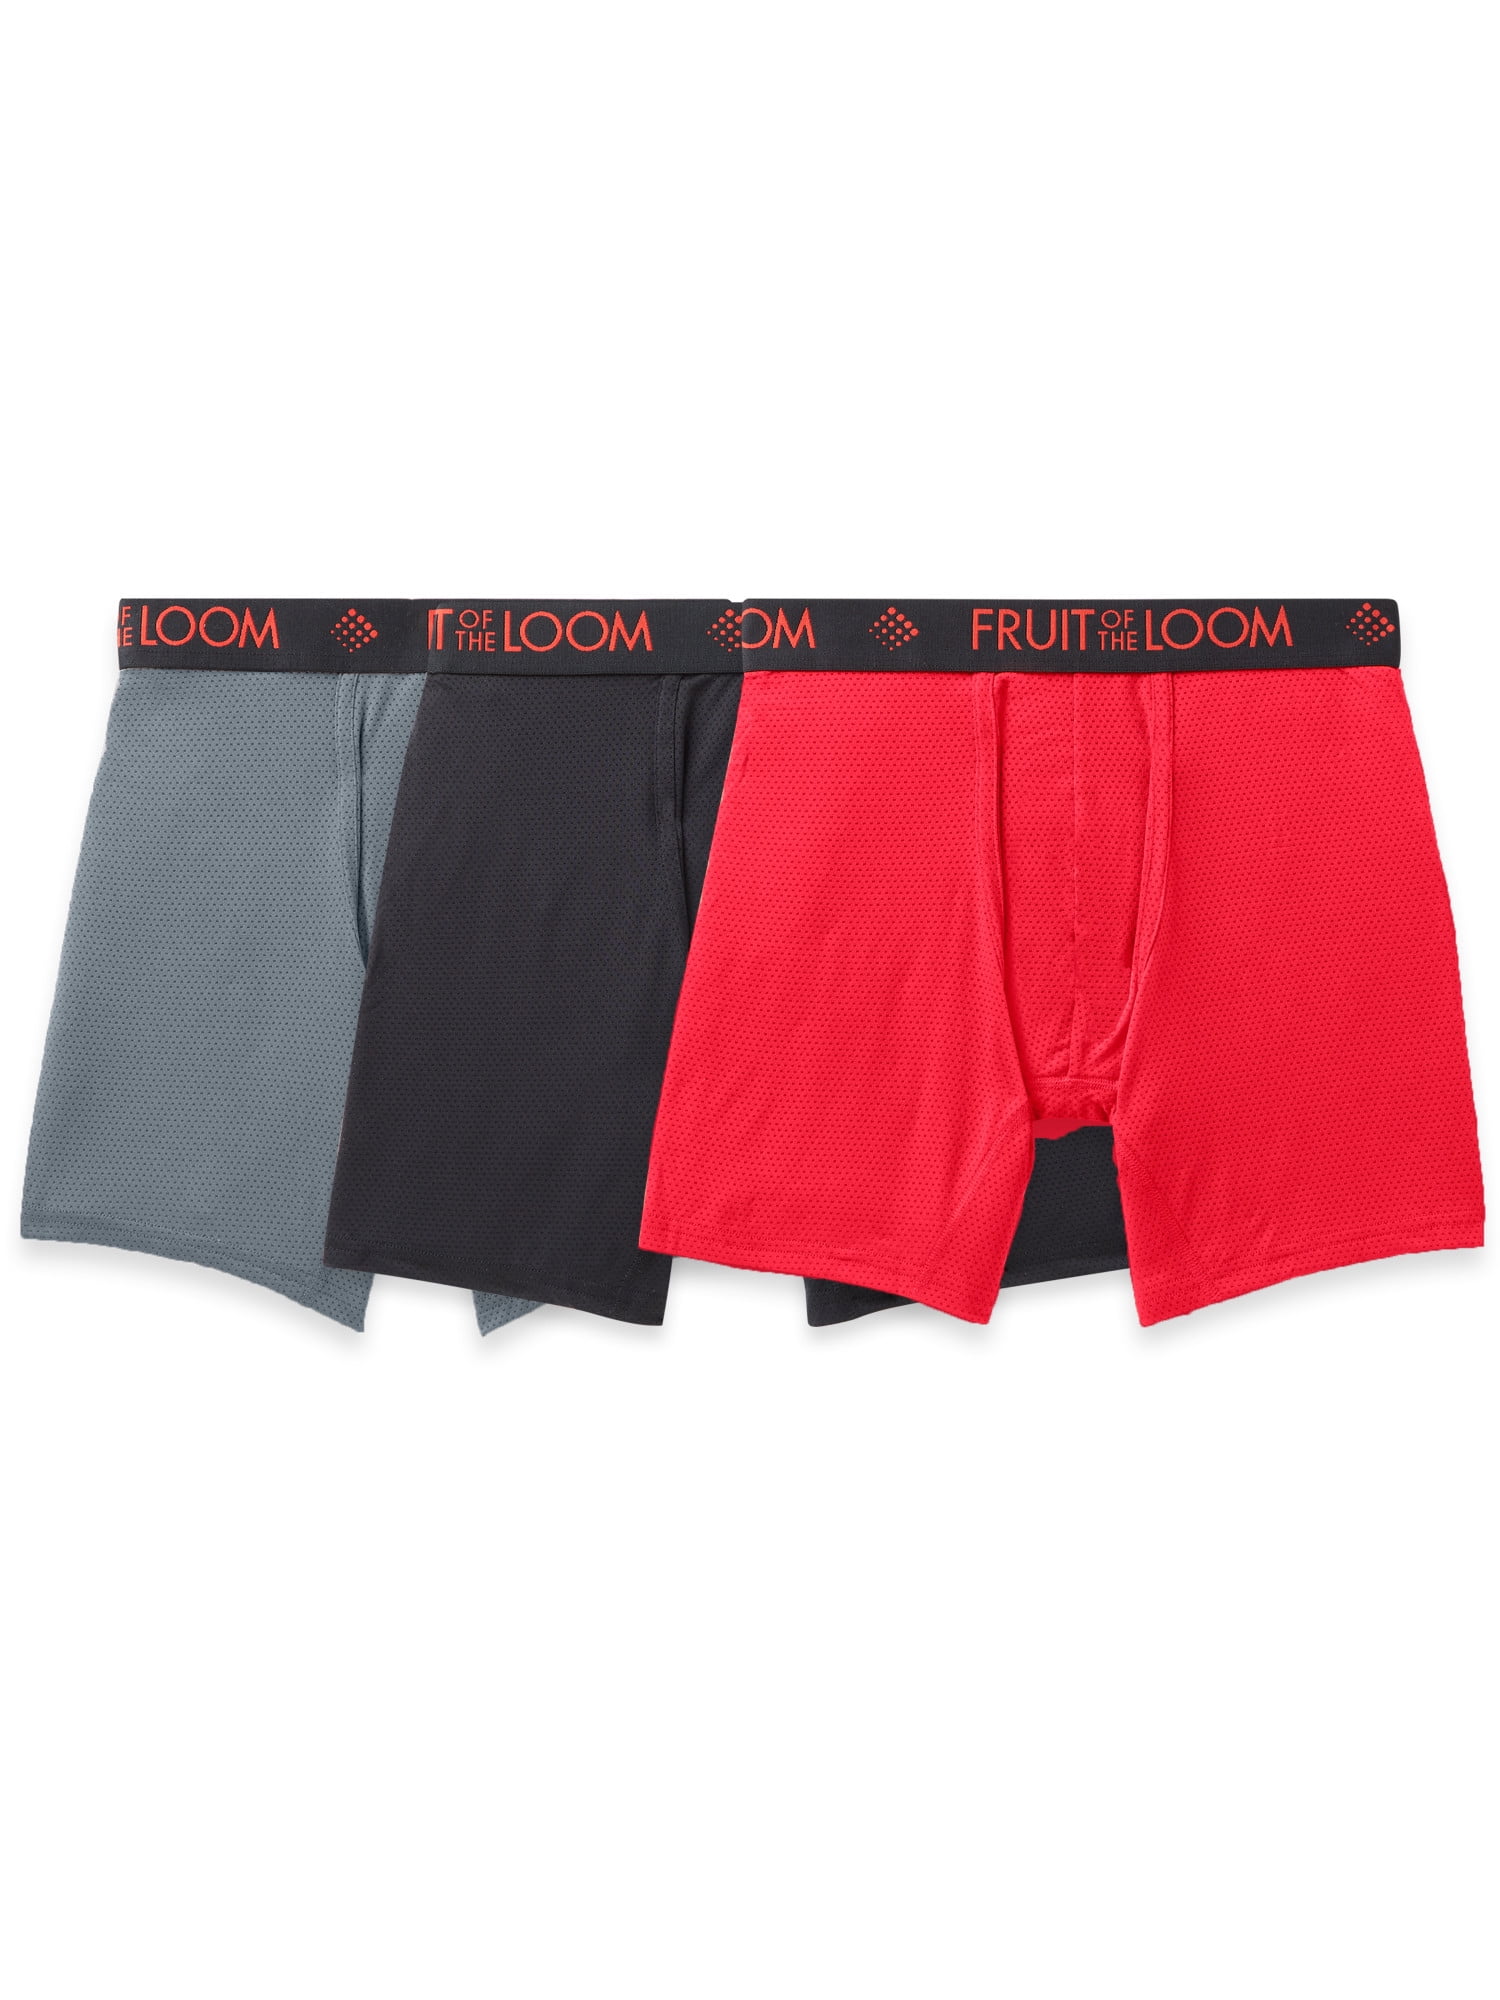 Fruit of the Loom Mens Breathable Micro-Mesh Boxer Palestine